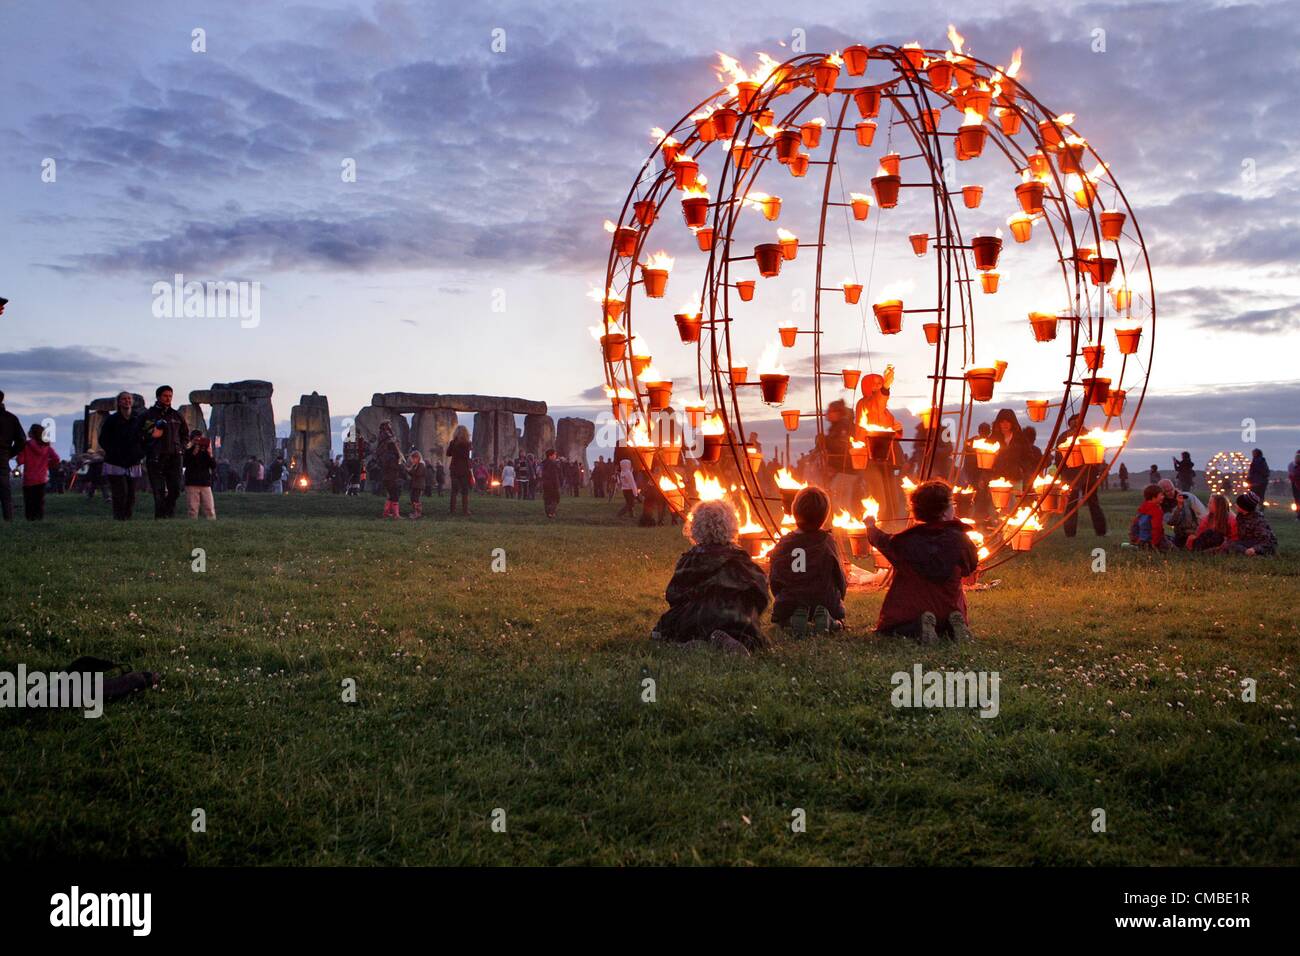 Wiltshire, UK. Tuesday 10th July 2012. Three children get a close view of part of the Fire Garden at Stonehenge in Wiltshire. French outdoor fire alchemists Compagnie Carabosse present the FIRE GARDEN at the World Heritage Site Stonehenge in Wiltshire on 10th - 12th July  as part of the London 2012 Festival. Stock Photo